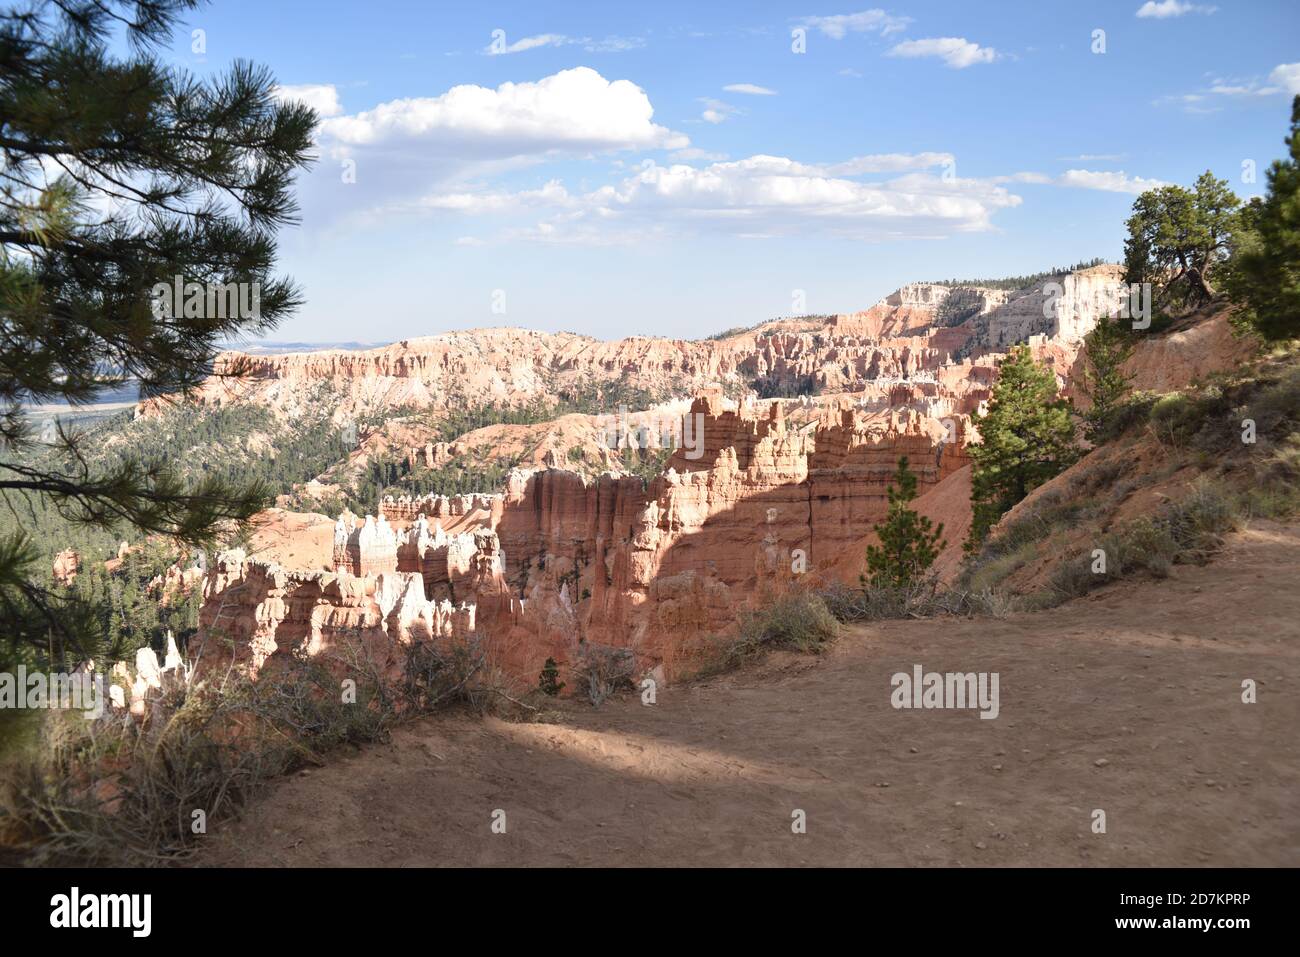 Bryce Canyon National Park, UT., U.S.A. 8/15/2020.  Bryce Canyon viewpoints: Farview, Fairyland, Sunrise & Sunset, Inspiration & Bryce points. Stock Photo